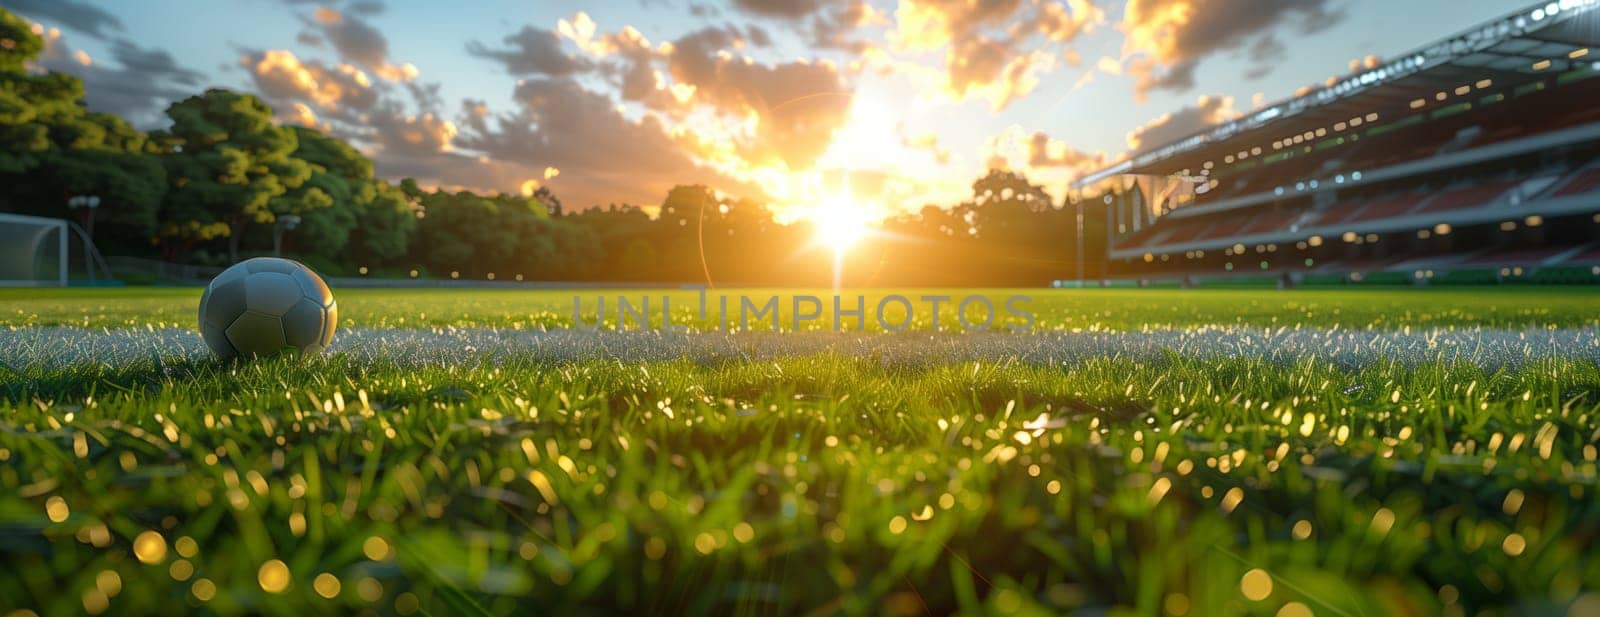 Sunset casting a warm glow over soccer field, with ball in foreground by richwolf